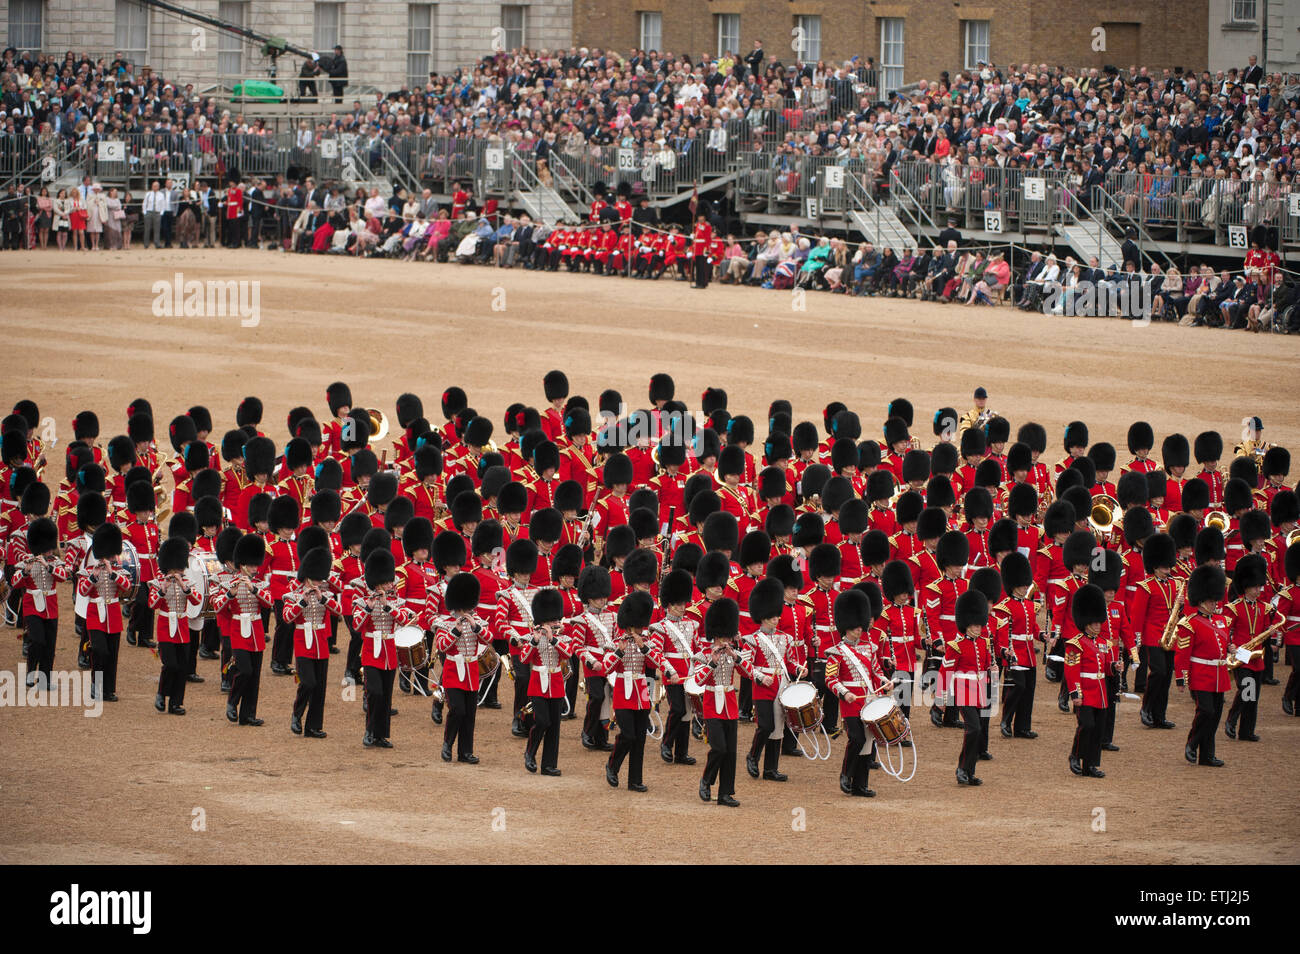 Massed Bands of the Foot Guards Troop at Trooping the Colour ceremony in Horse Guards Parade, London. Stock Photo